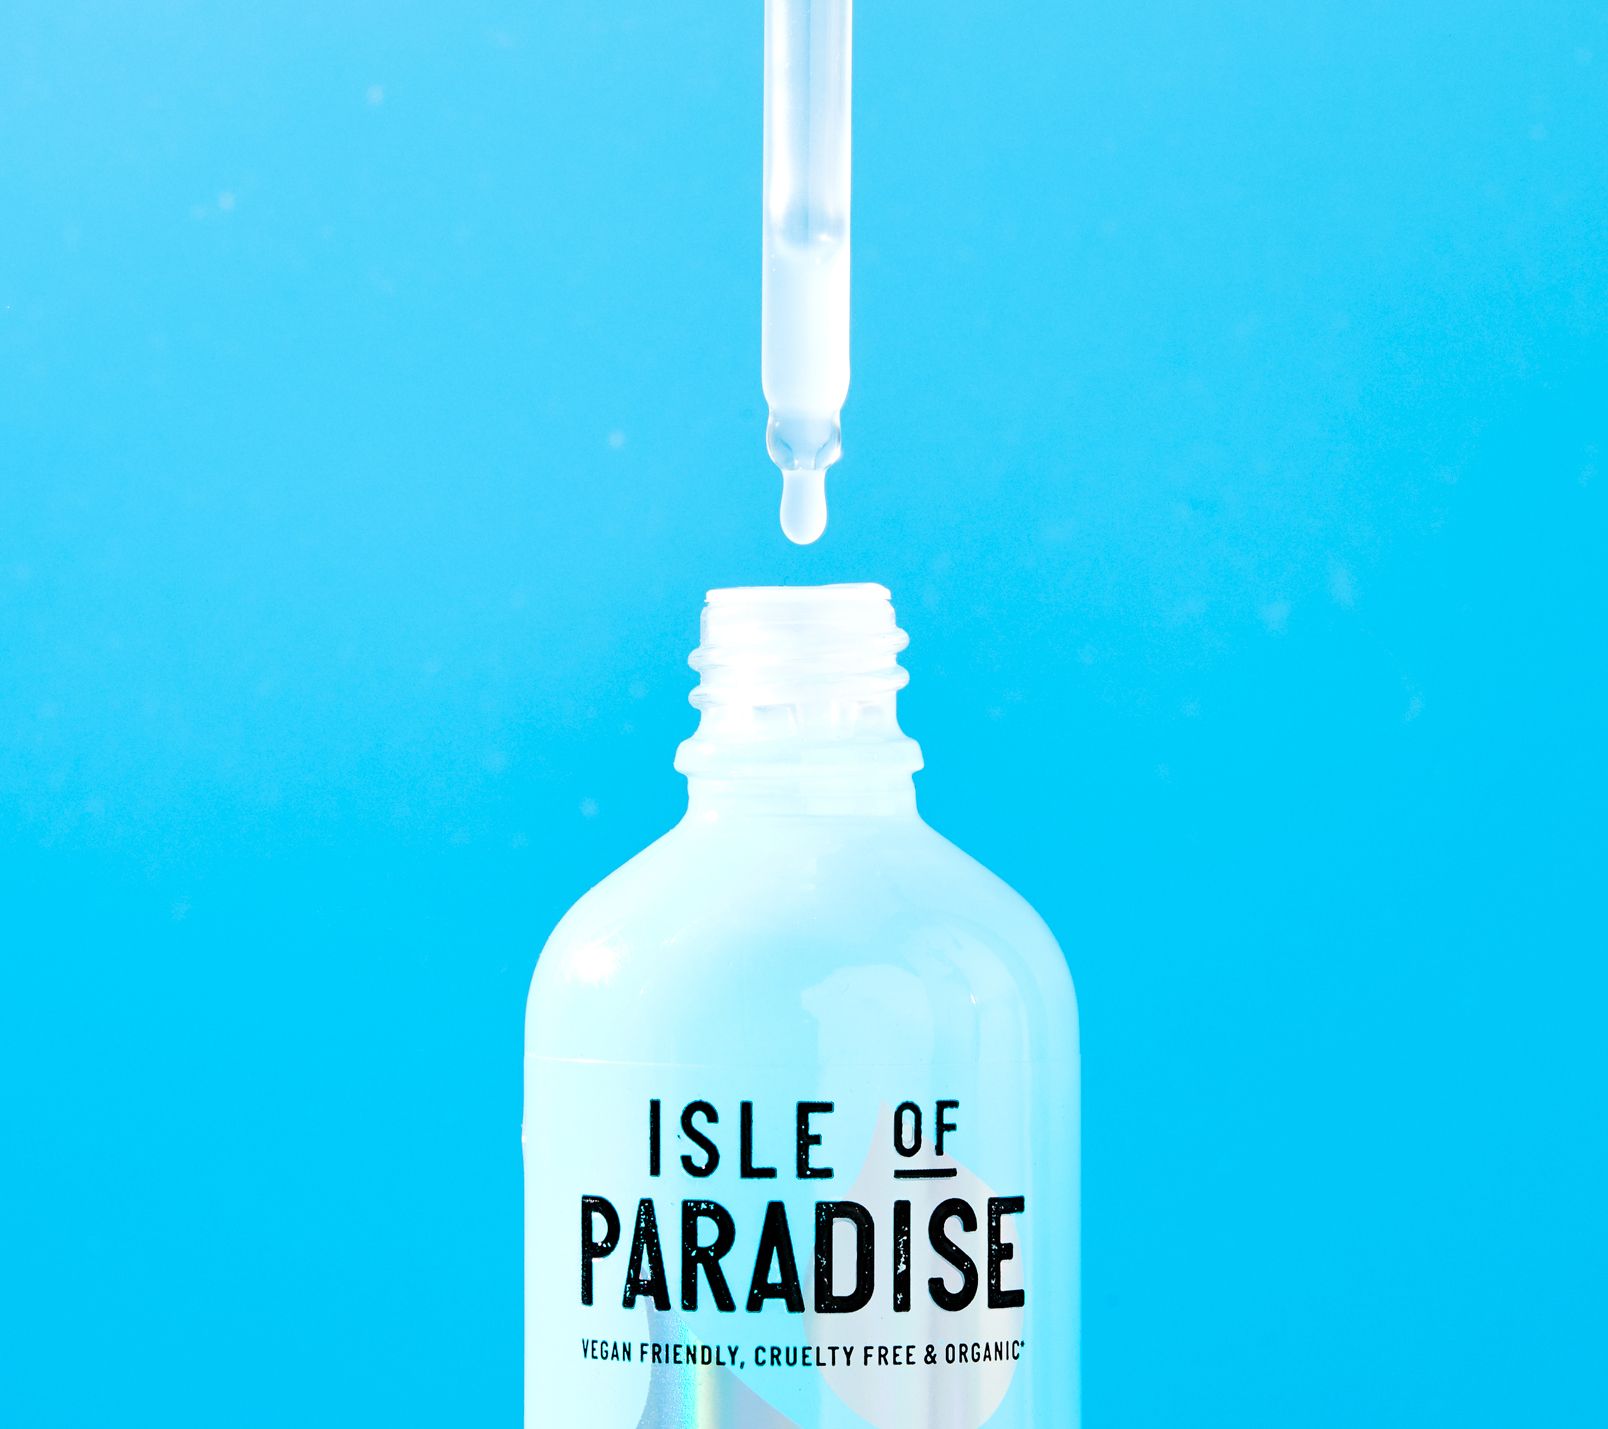 Isle of Paradise's New Self-Tanning Serum Gave Me Instant Vacation